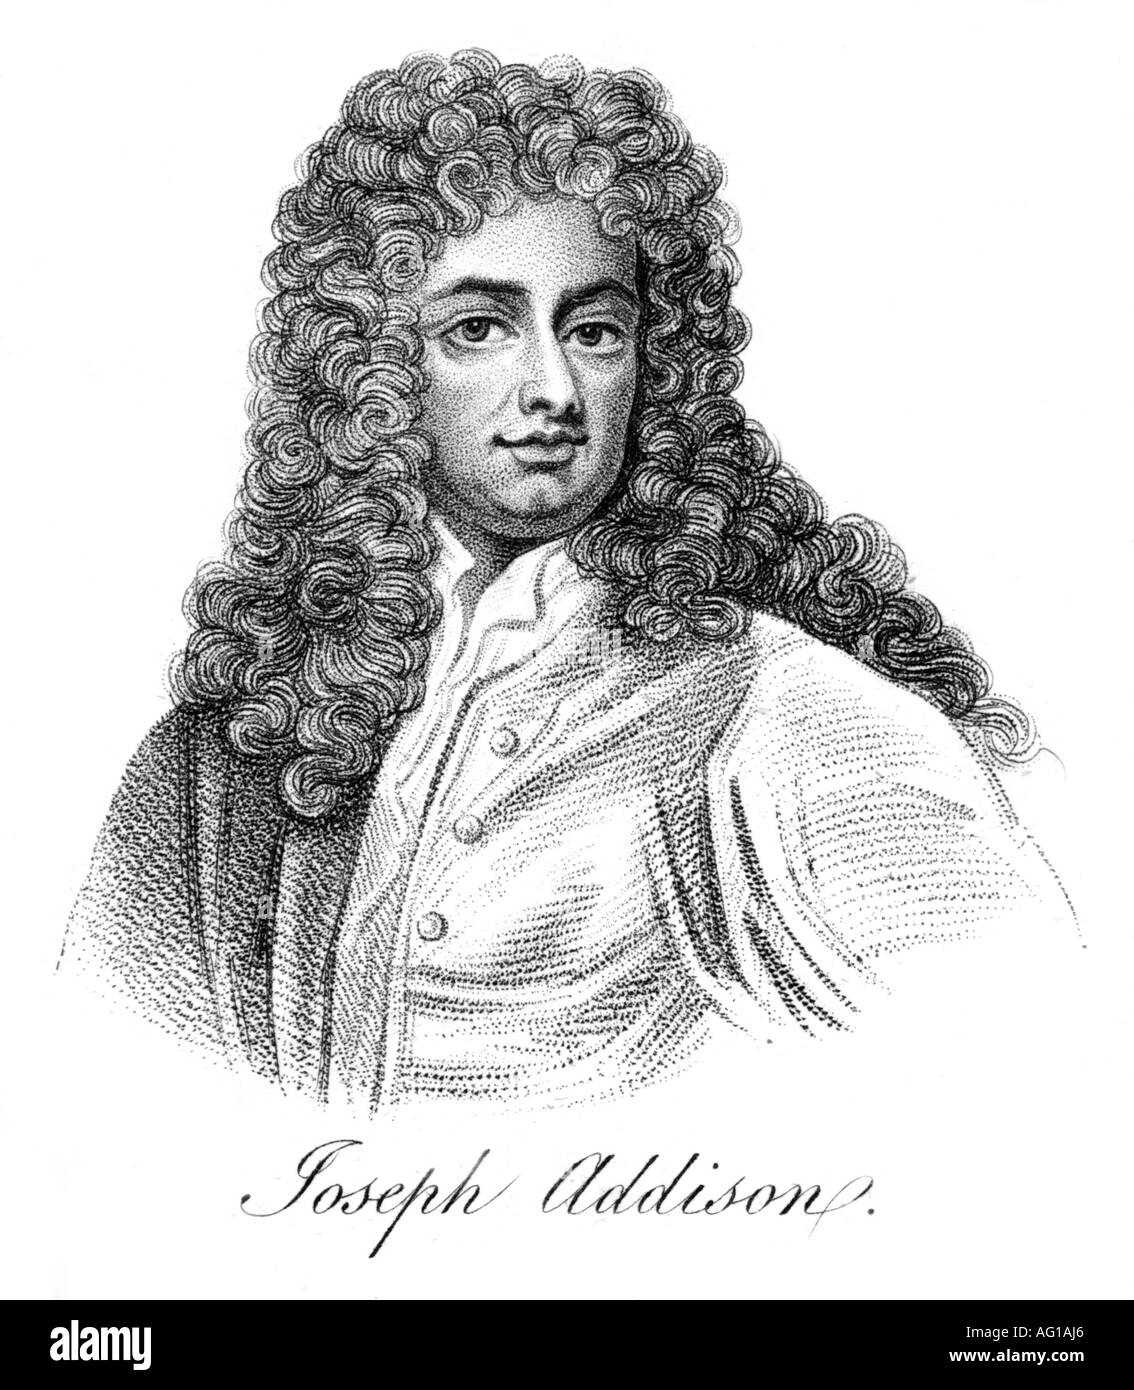 Addison, Joseph, 1.5.1672 - 17.6.1719, English author/writer & politician, portrait, engraving, London 1811, Great Britain, politics, , Artist's Copyright has not to be cleared Stock Photo